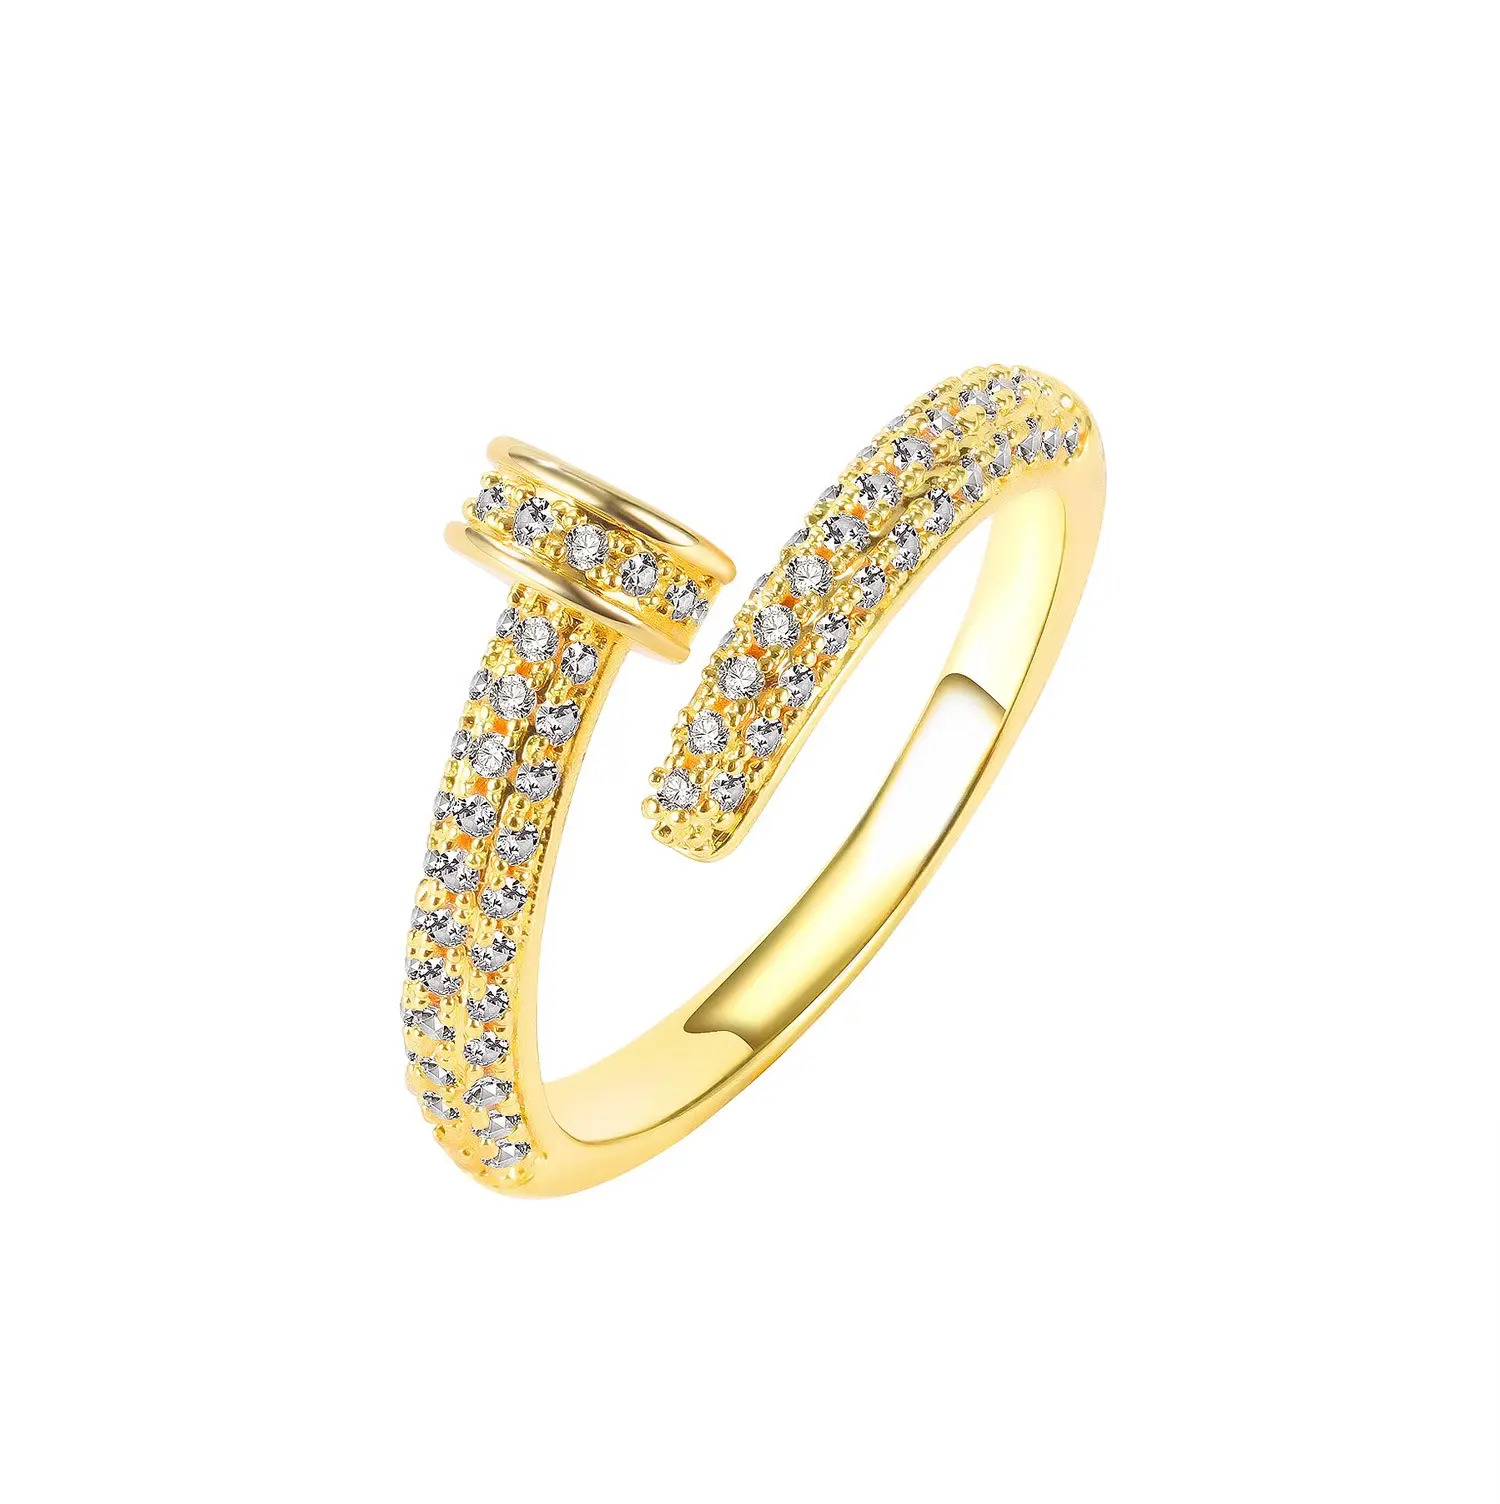 Japanese Open Ring Jewelry 2021 Fashion DIY Charm Jewellery Women Plated 18K Gold Nail Ring